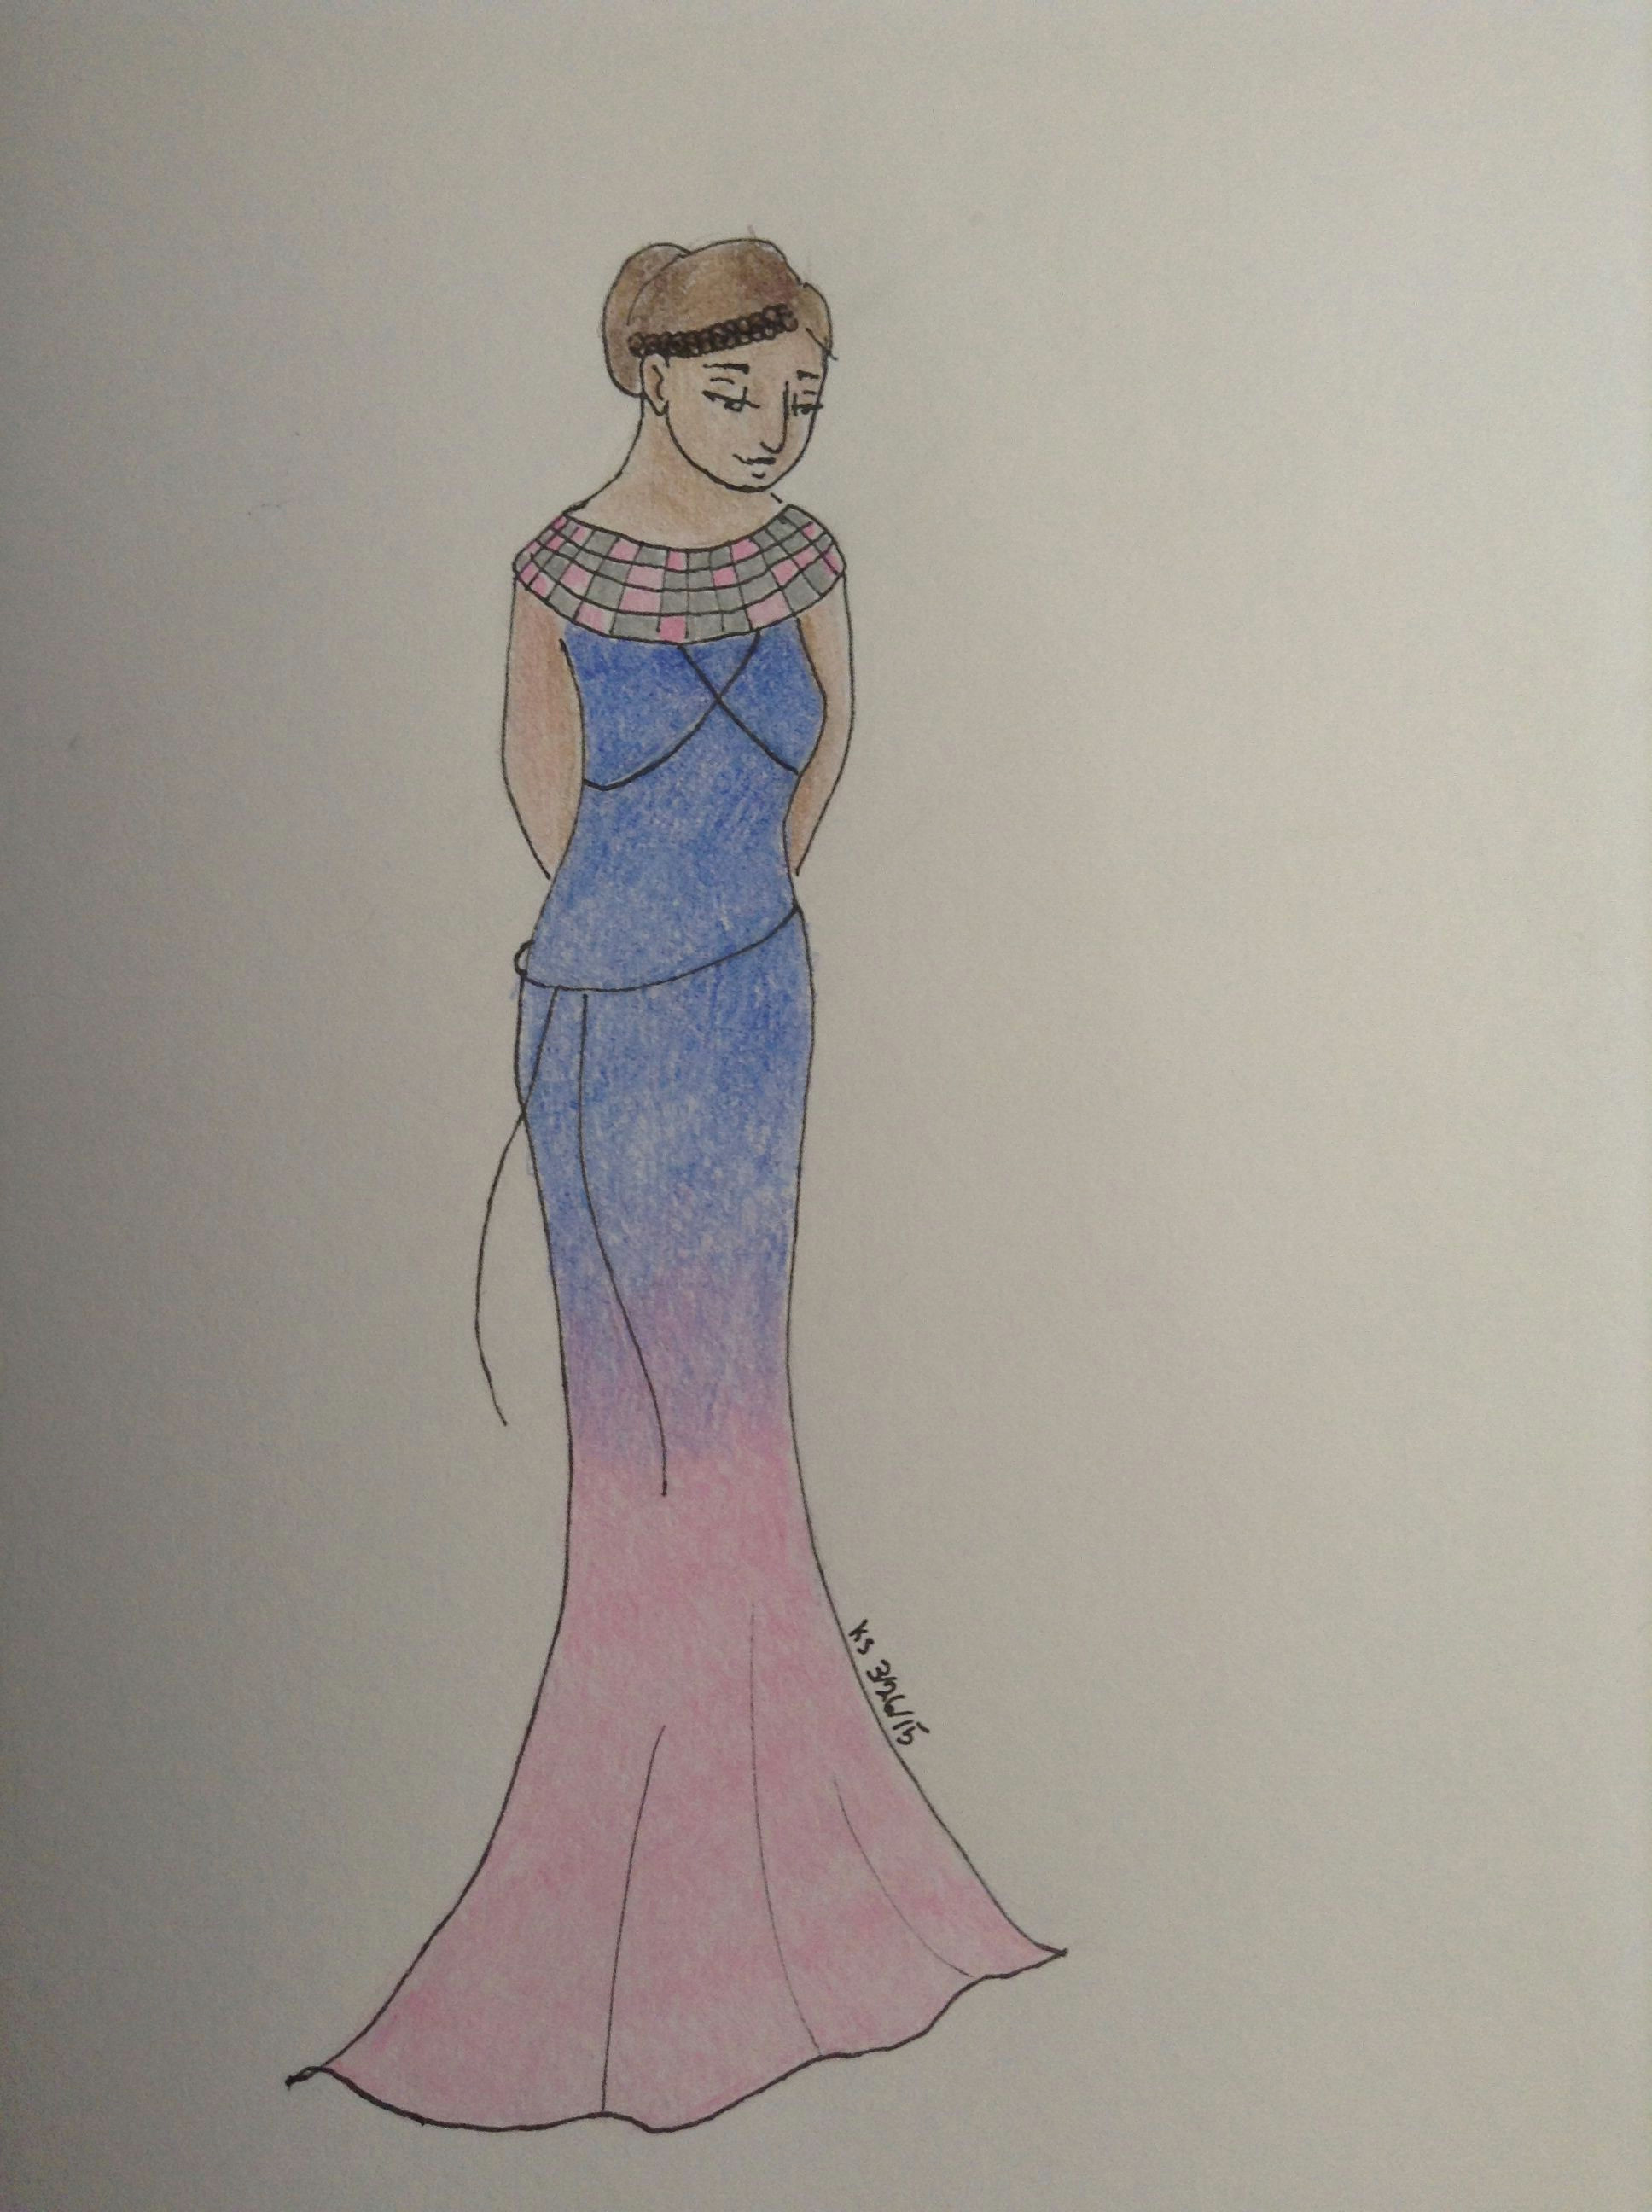 Drawing Of Girl In Blue Dress A Girl In A Dress I Designed Also Thanks to Those who Helped with